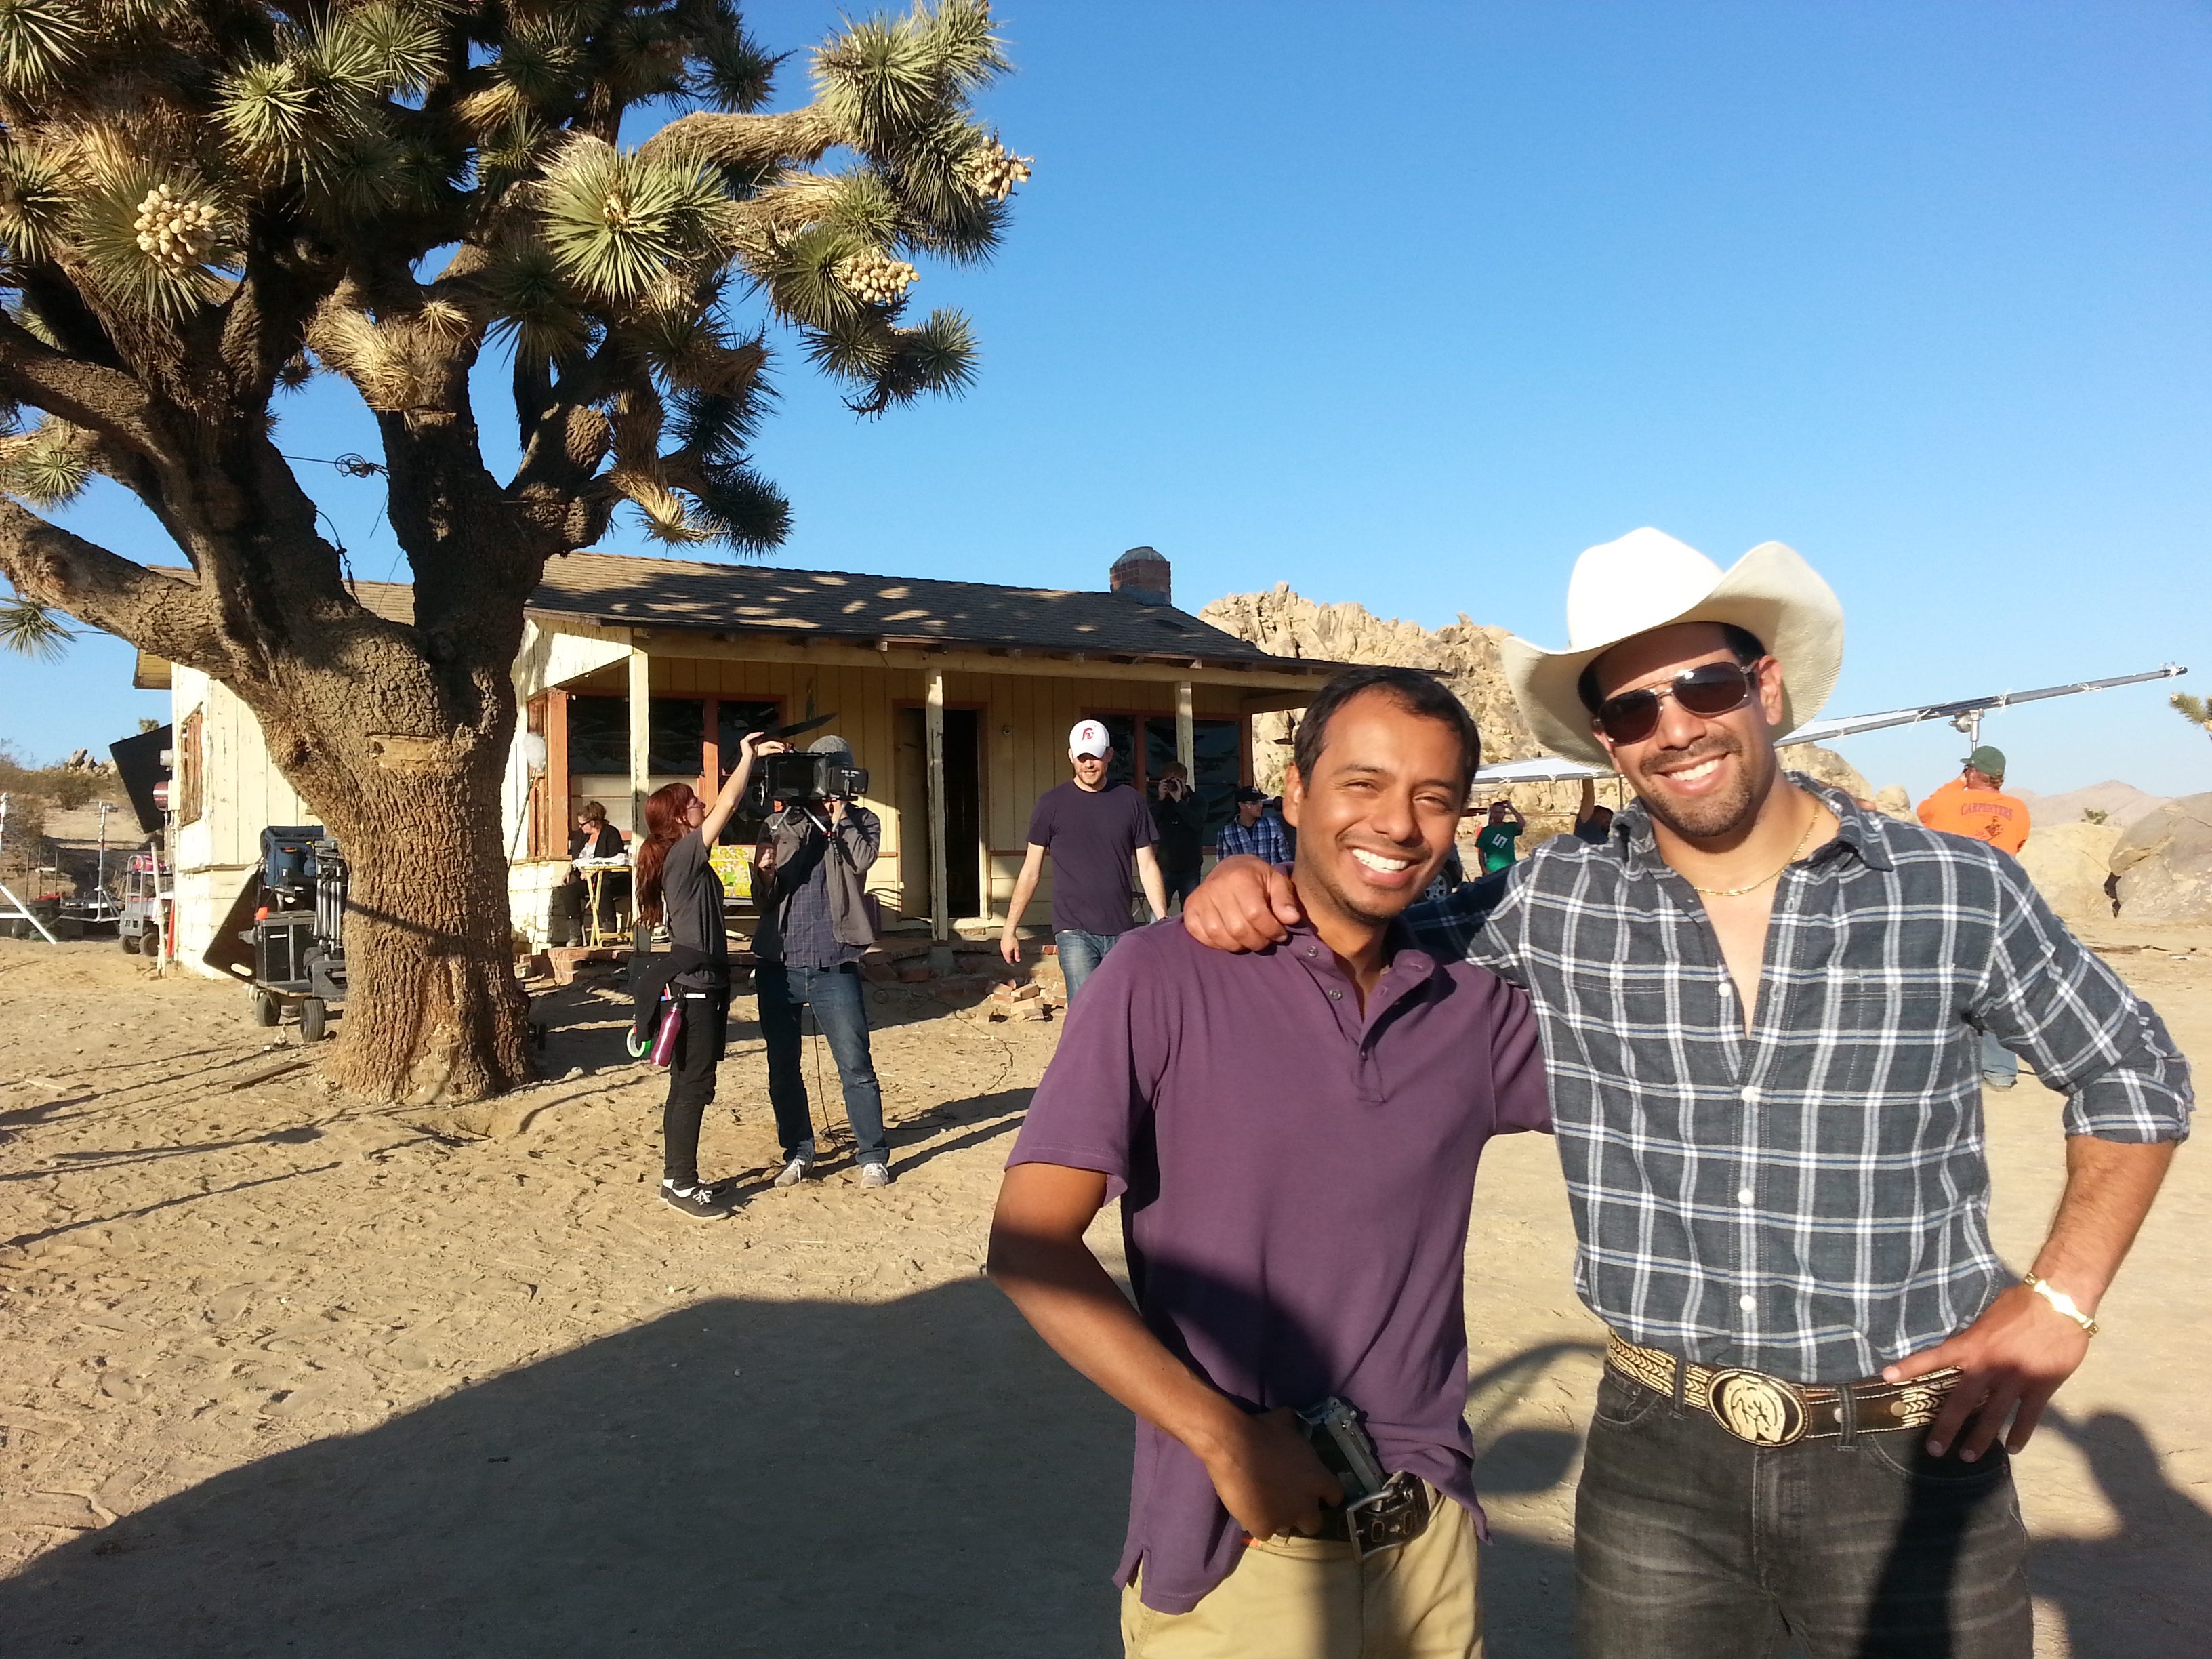 On the set of Frontera with good friend Carlos Moreno